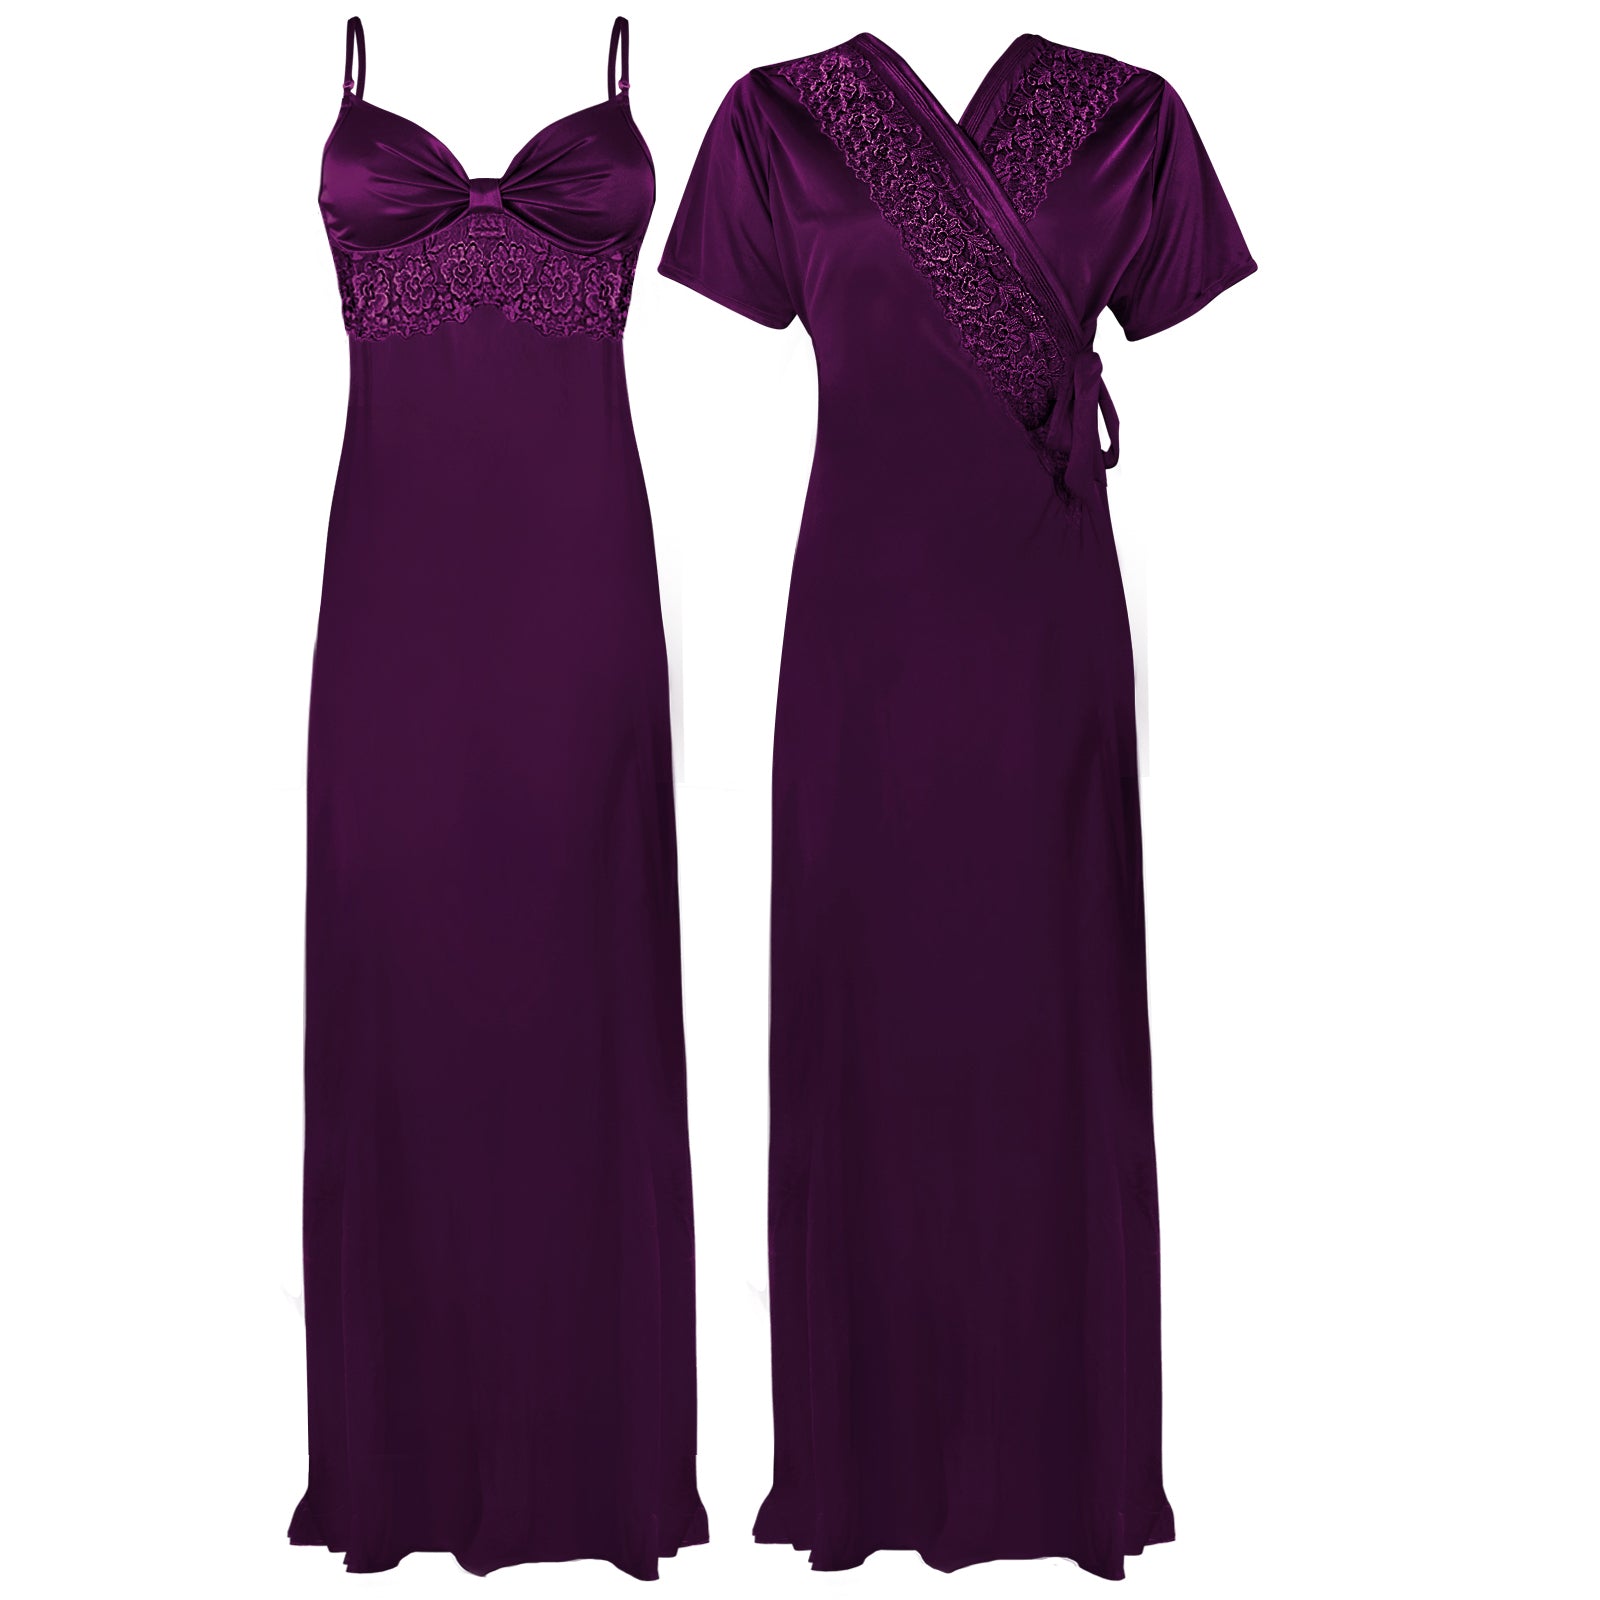 Dark Purple 1 / One Size The Orange Tags Women Satin LACE Long Nightdress Ladies Nighty Chemise Embroidery Detailed The Orange Tags